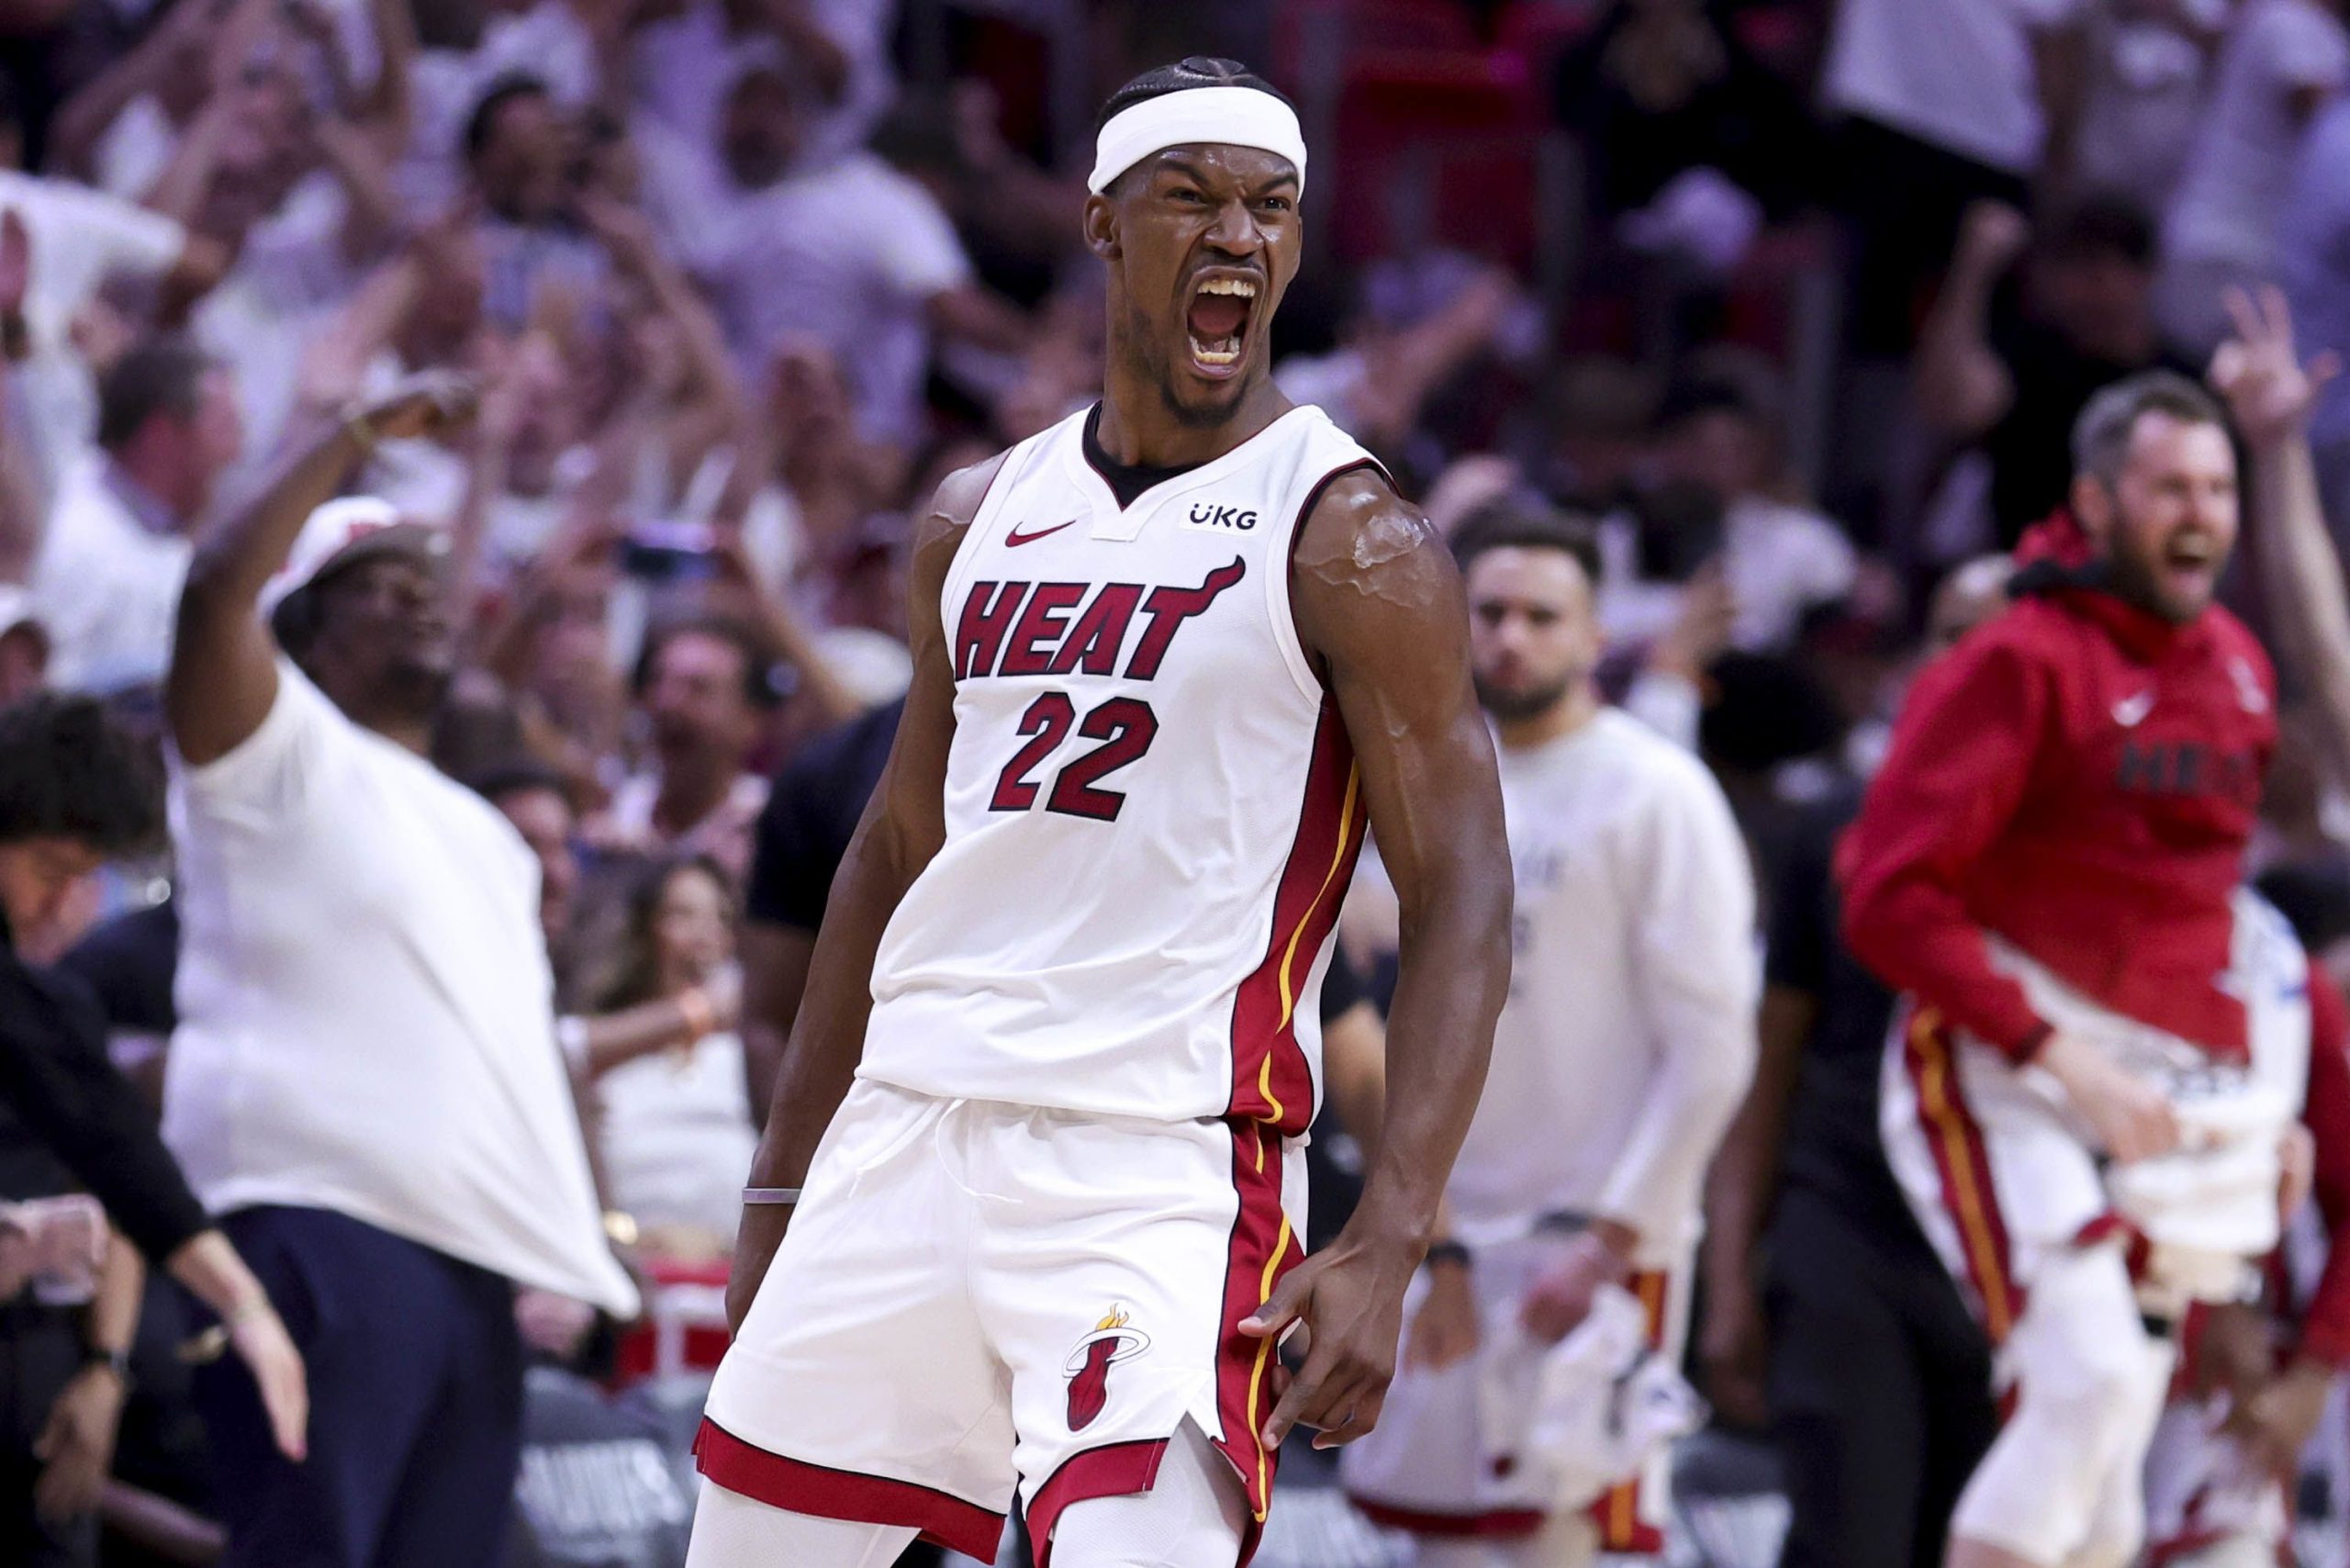 Heat's Winning Streak Hits 6: How Butler's 32-Point Game and Team Effort Are Shaking Up the NBA East